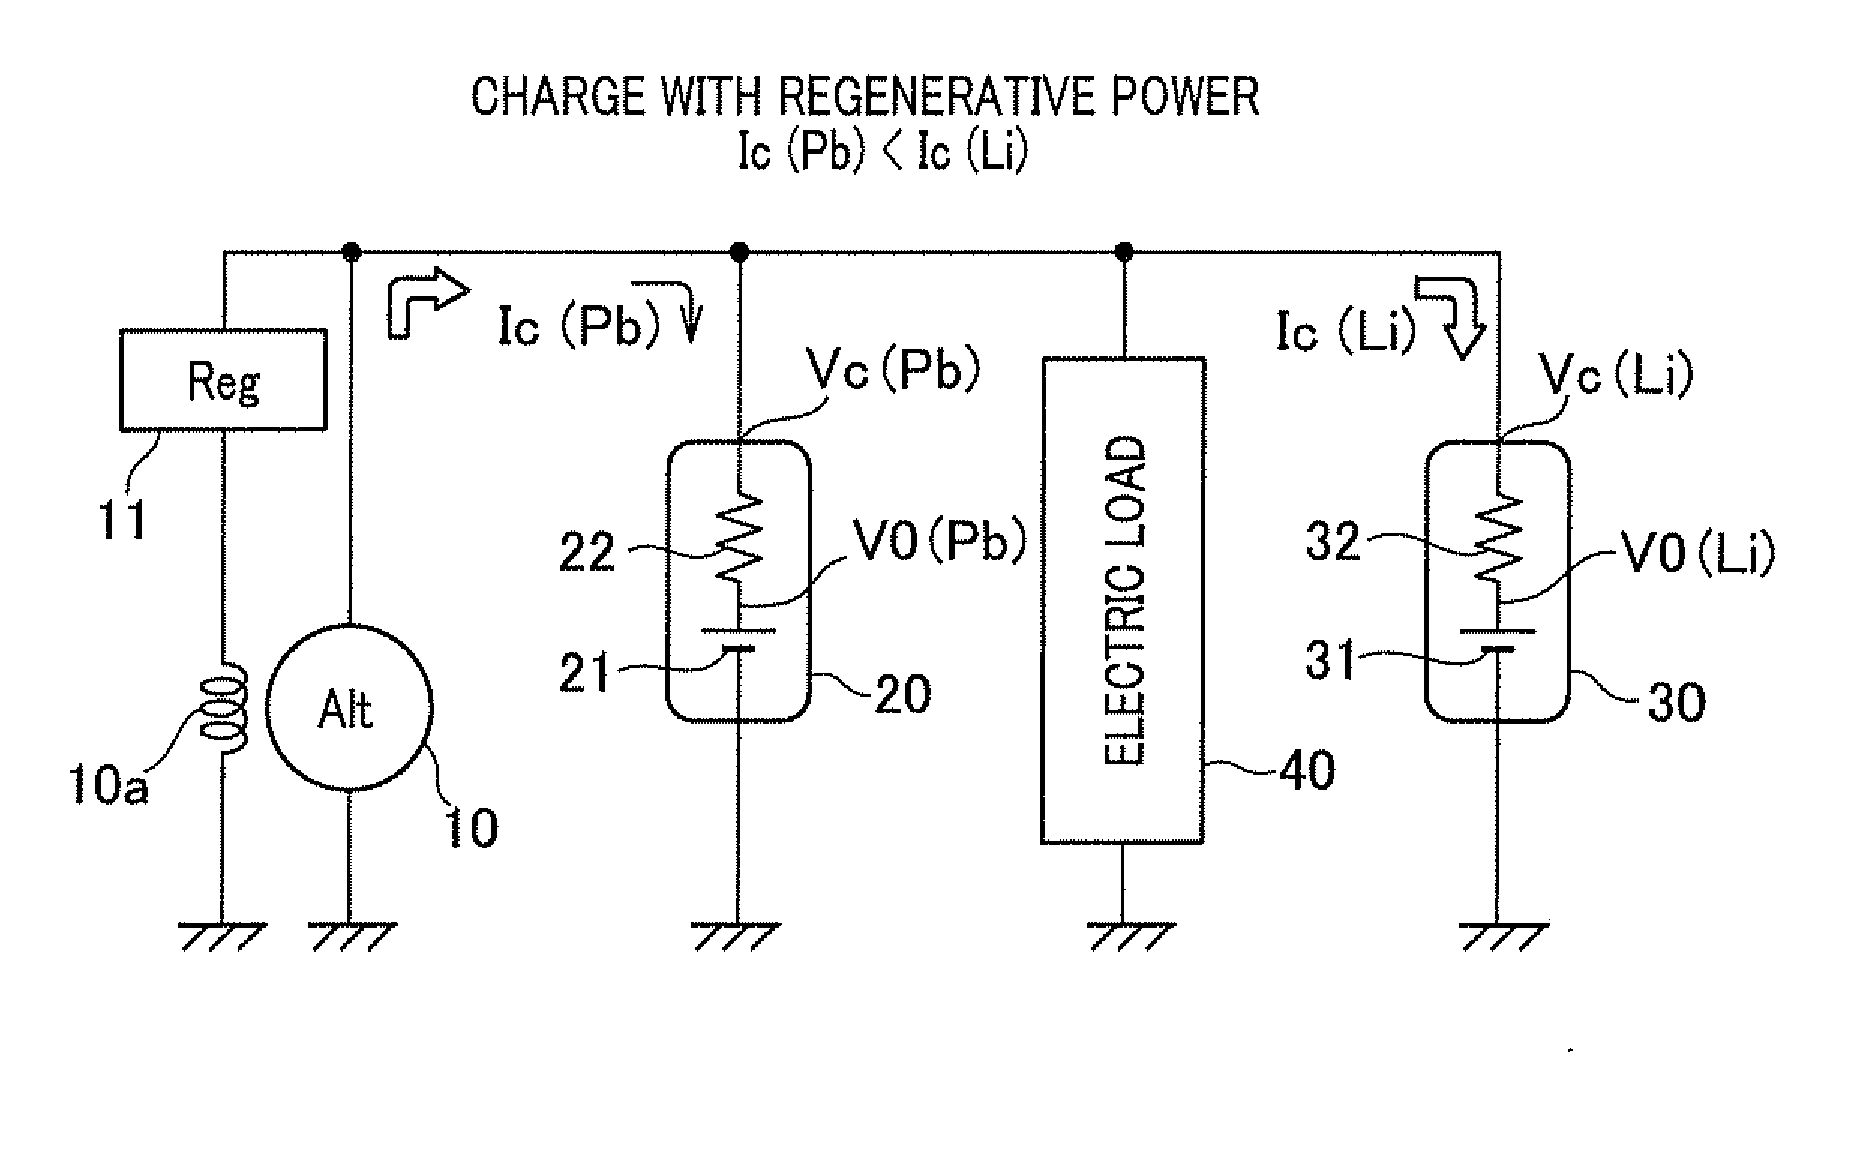 Power source apparatus for vehicle